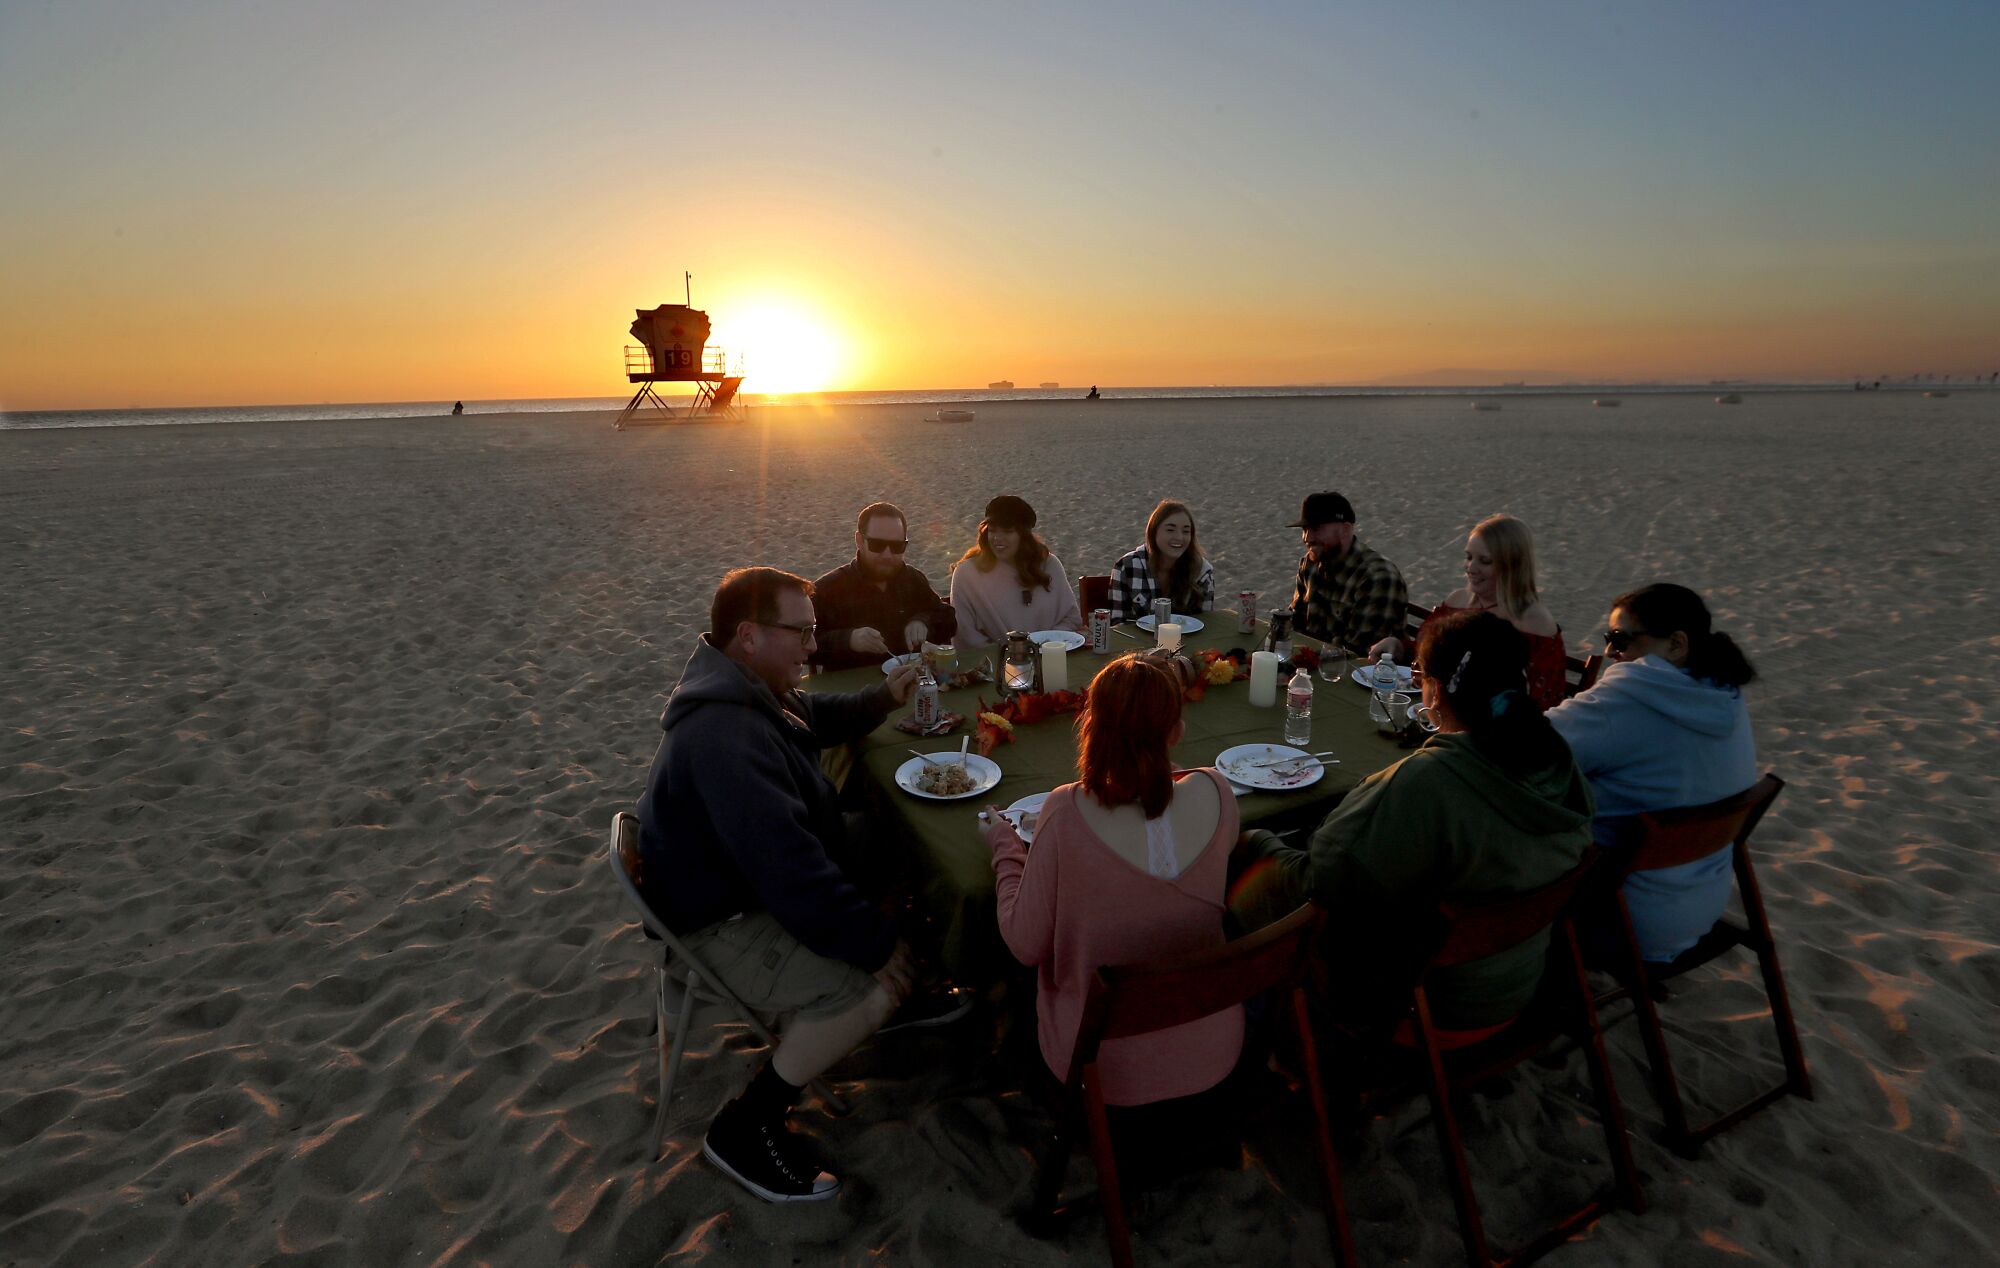 Nine people sit at a round table set up on the sand. In the background, the sun sets behind a lifeguard tower.